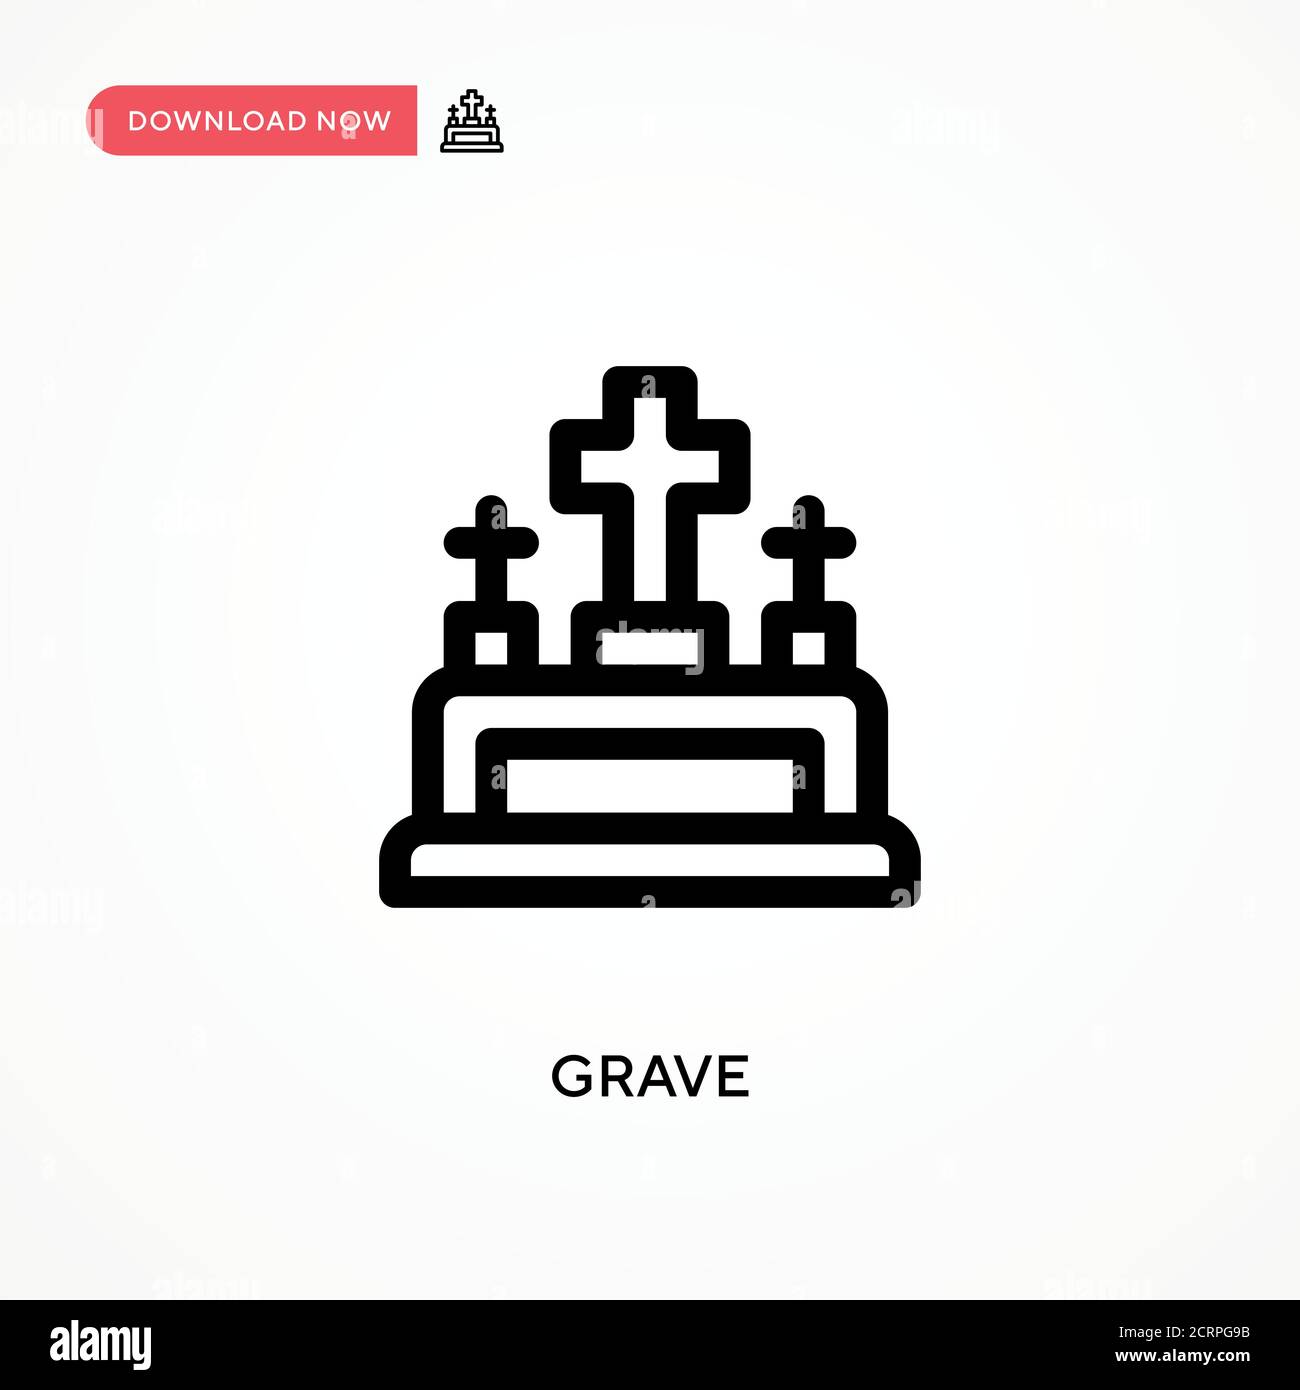 Grave Simple vector icon. Modern, simple flat vector illustration for web site or mobile app Stock Vector